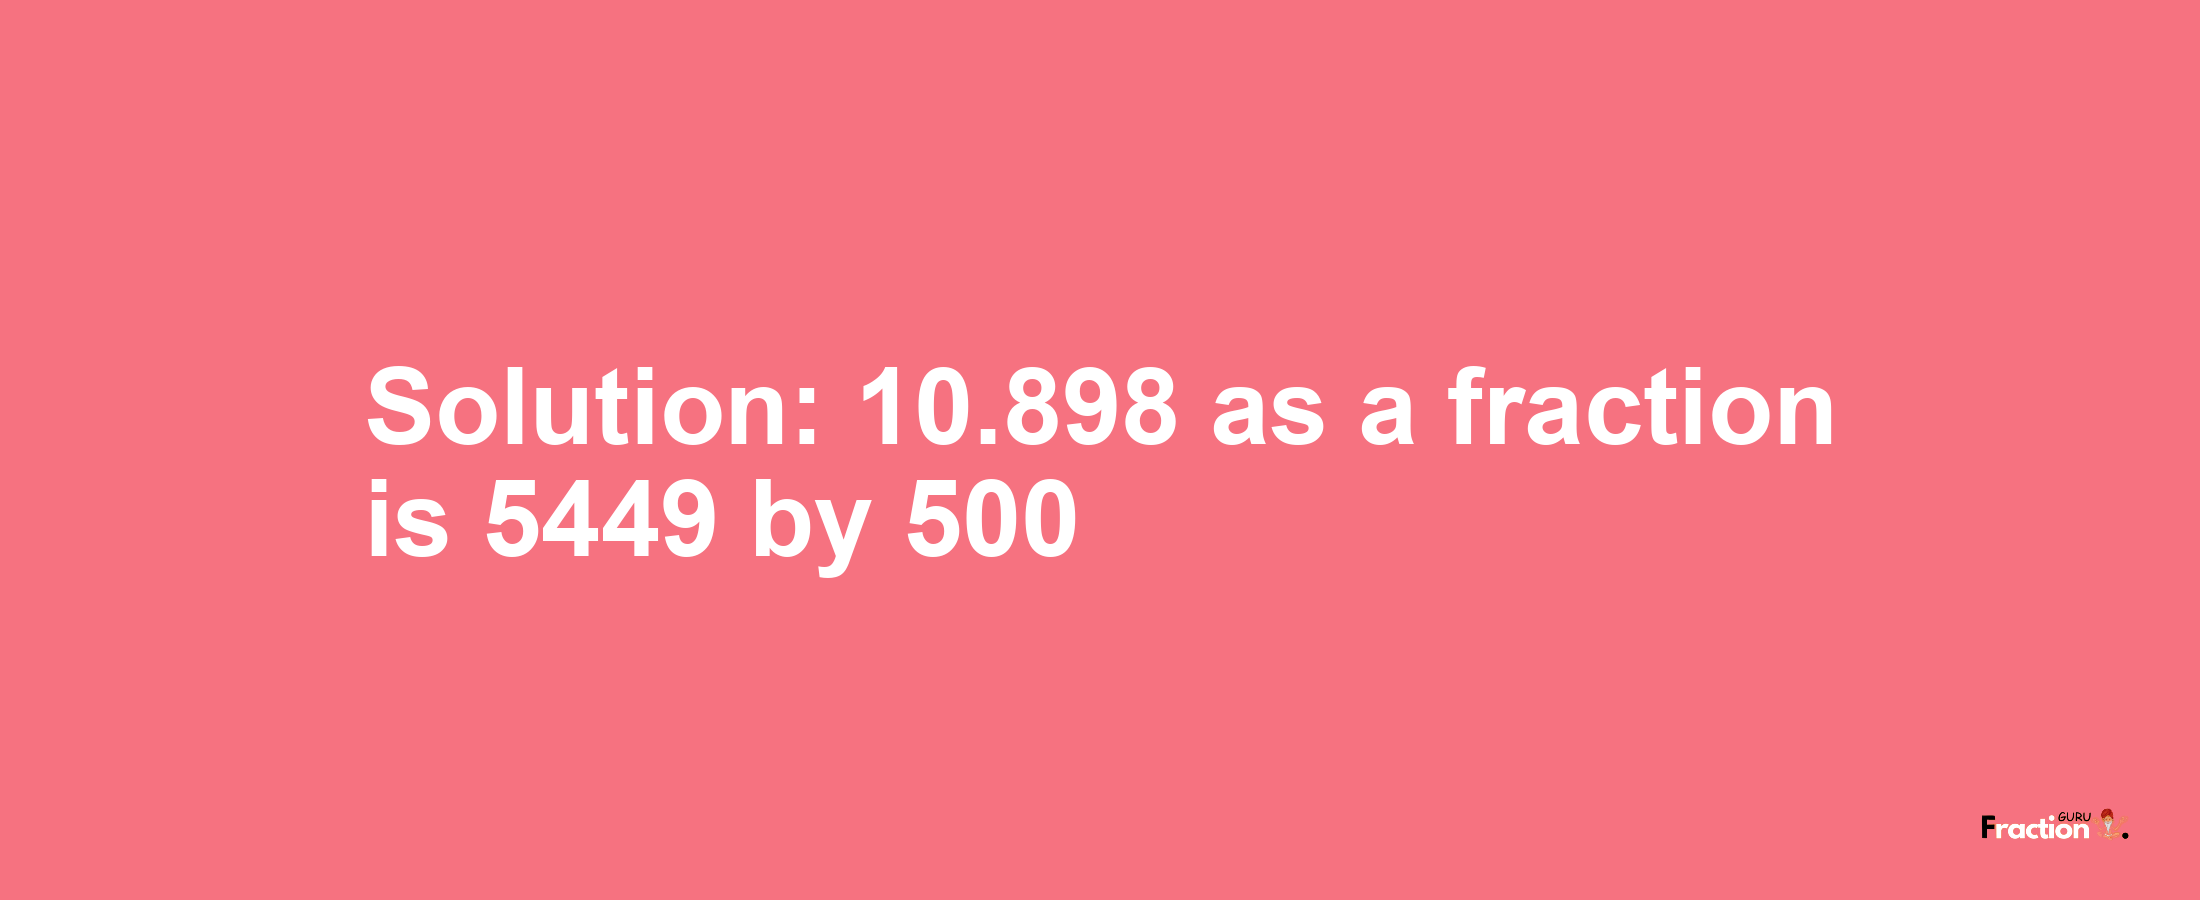 Solution:10.898 as a fraction is 5449/500